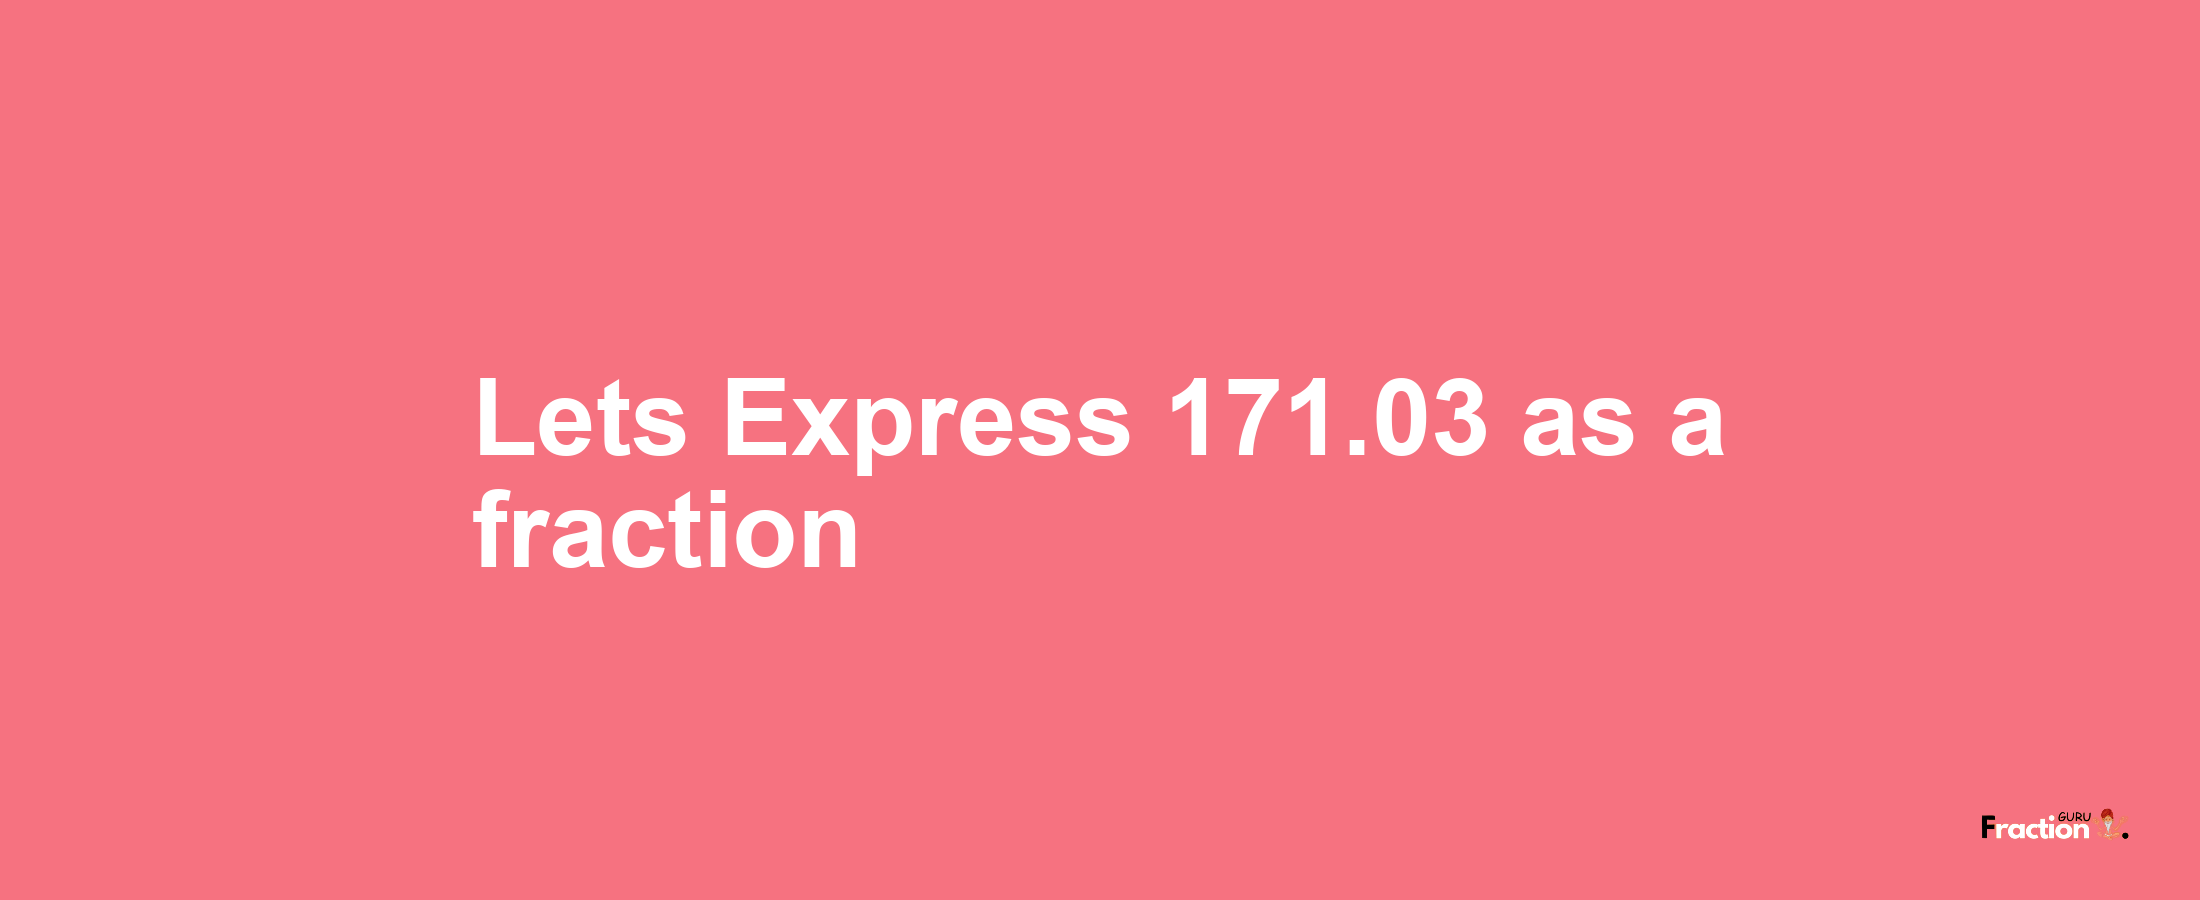 Lets Express 171.03 as afraction